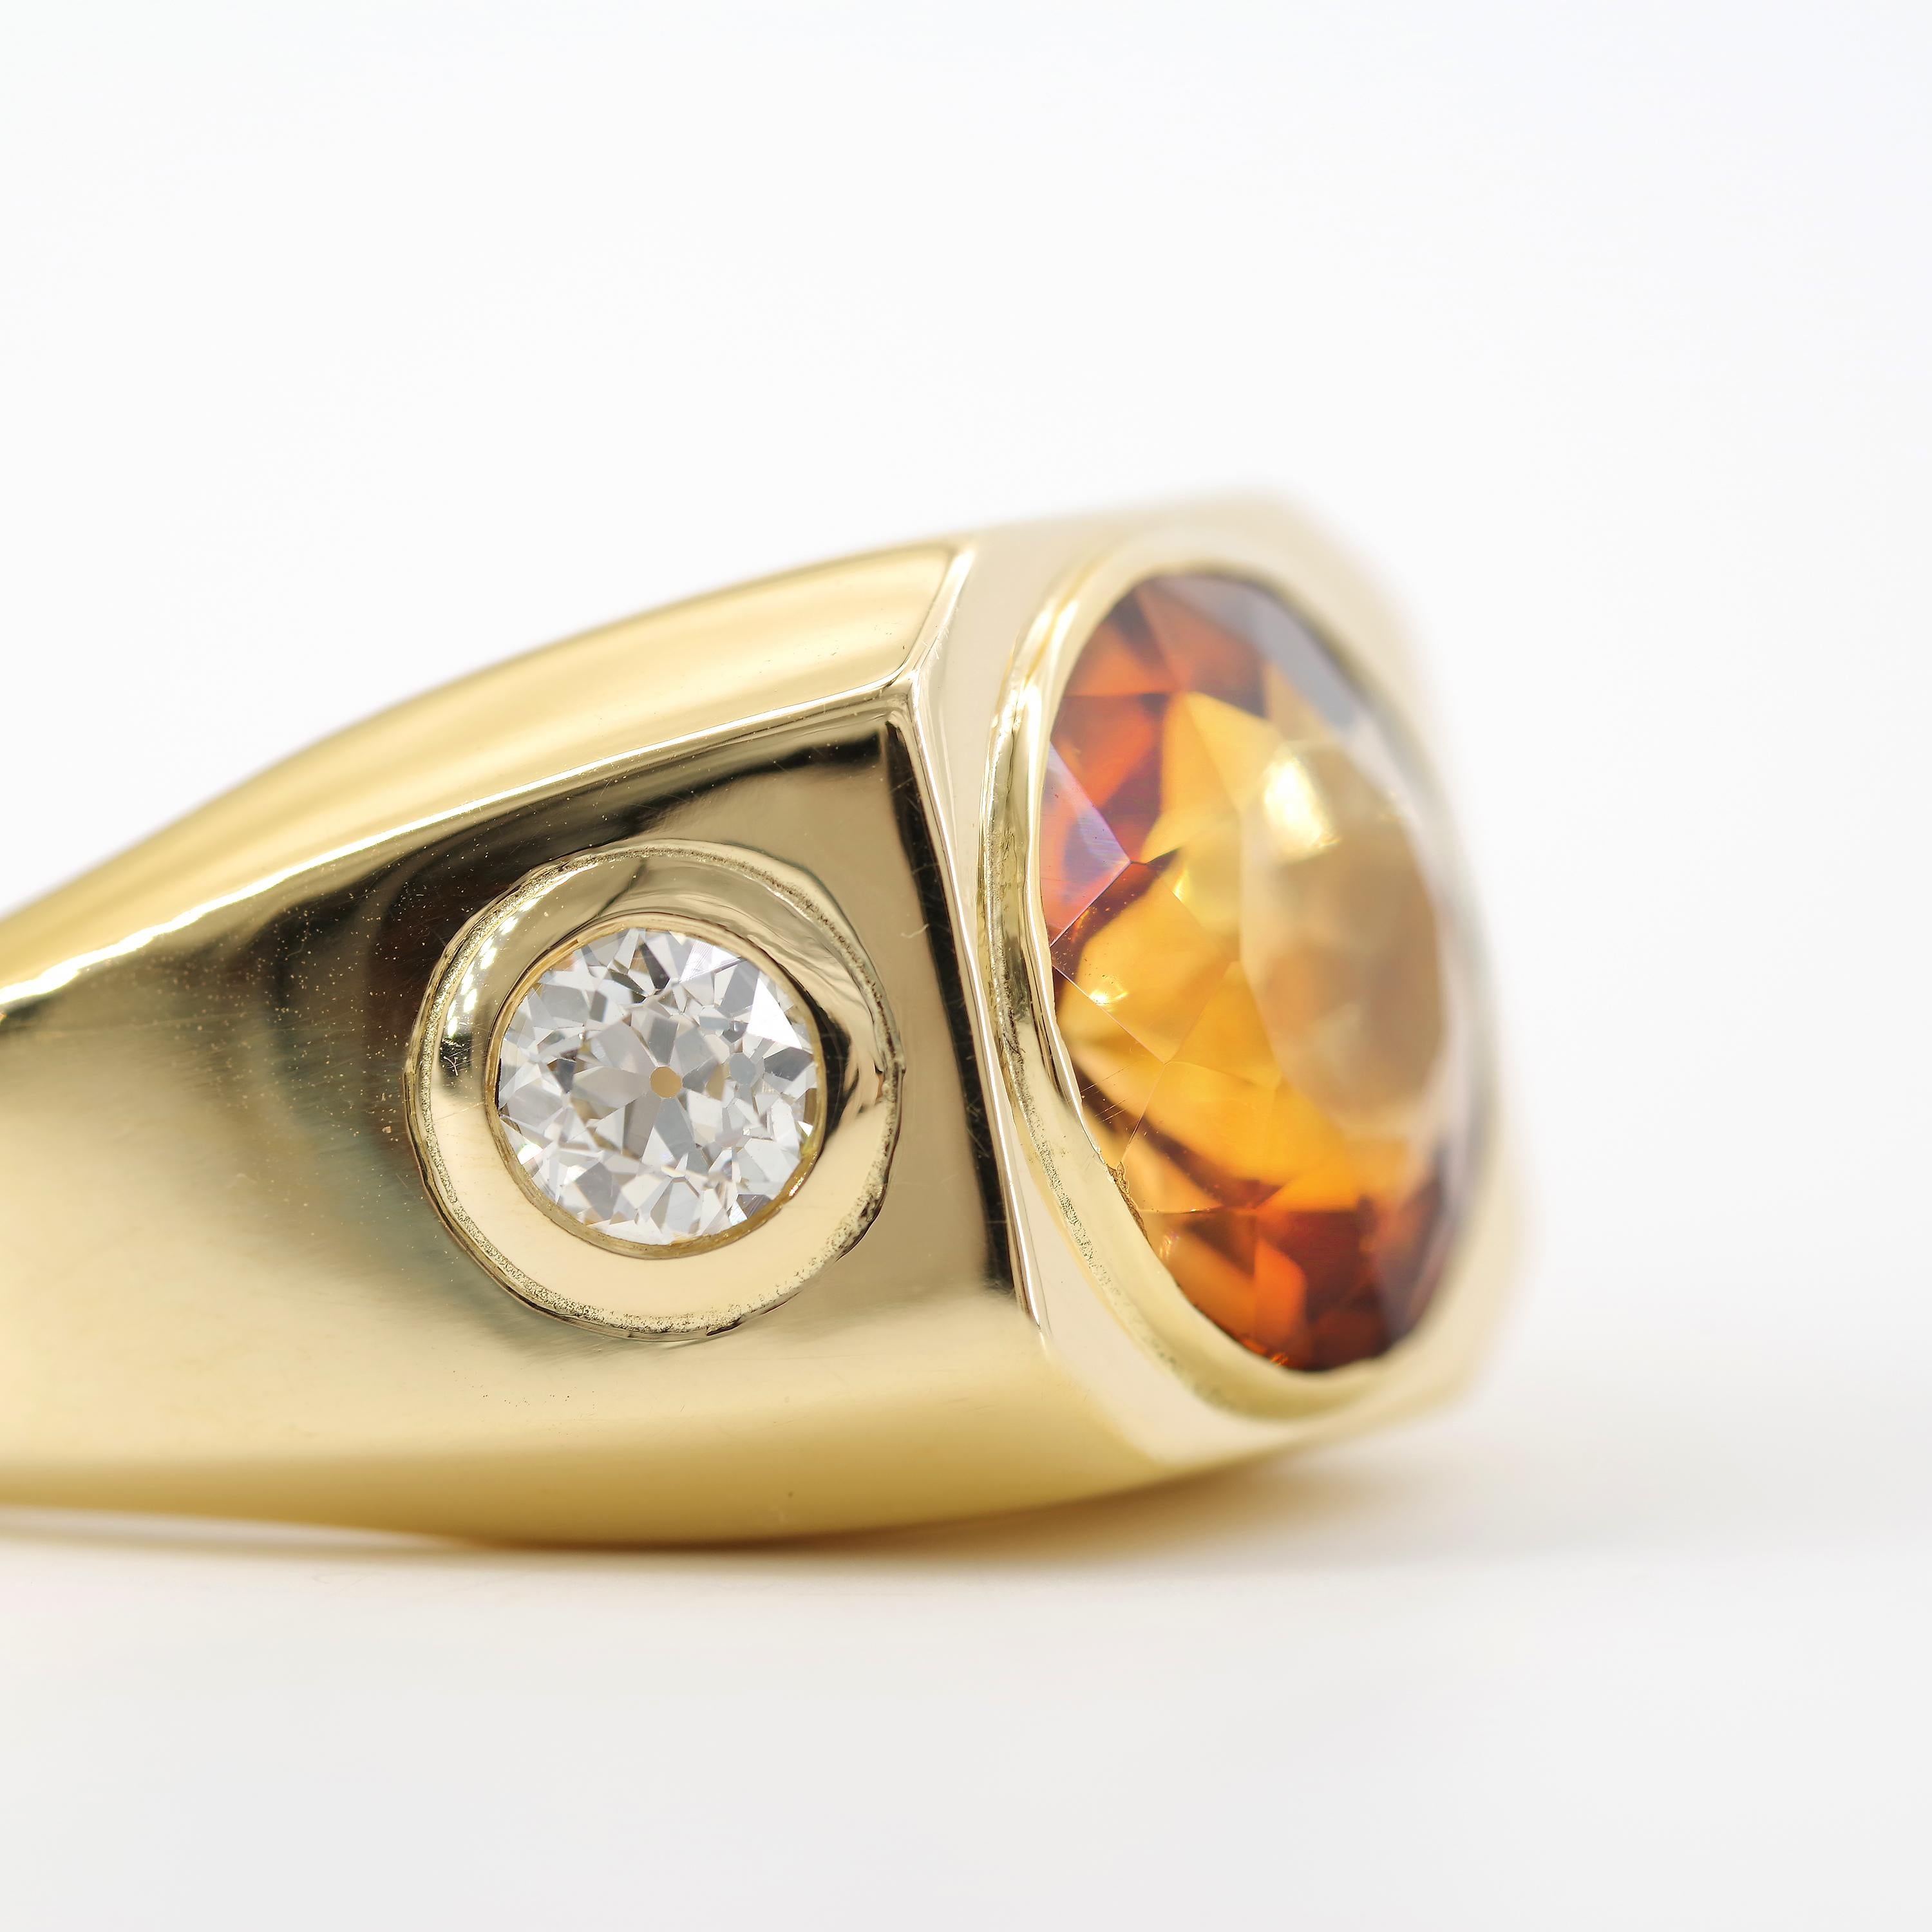 This ruggedly handsome 18k yellow gold ring features a large and round whiskey-colored Brazilian precious topaz that flashes with red, gold and umber, sometimes a little blue. 